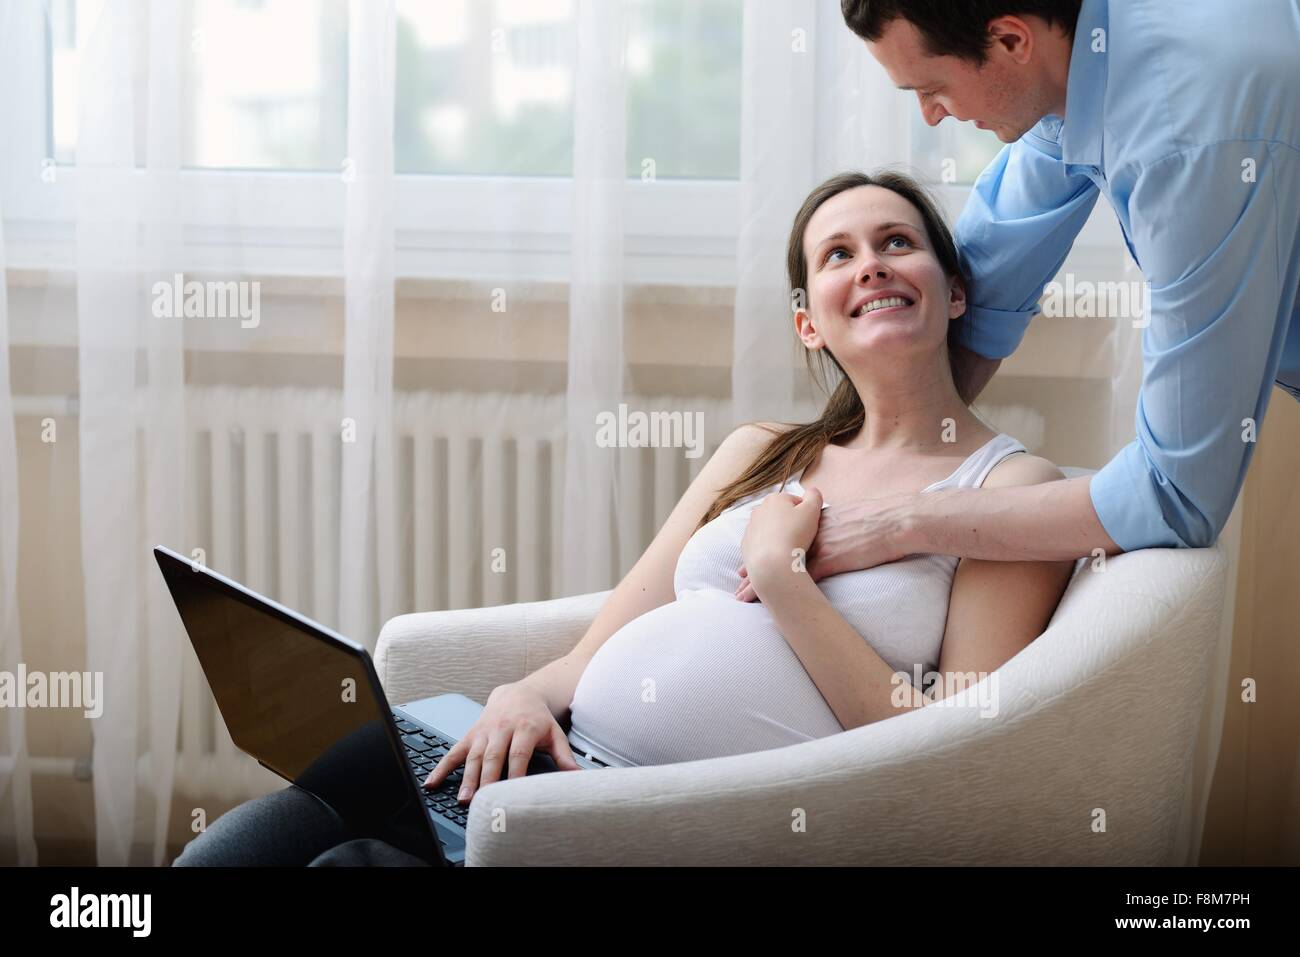 Pregnant woman sitting in chair, using laptop, husband holding her hand Stock Photo